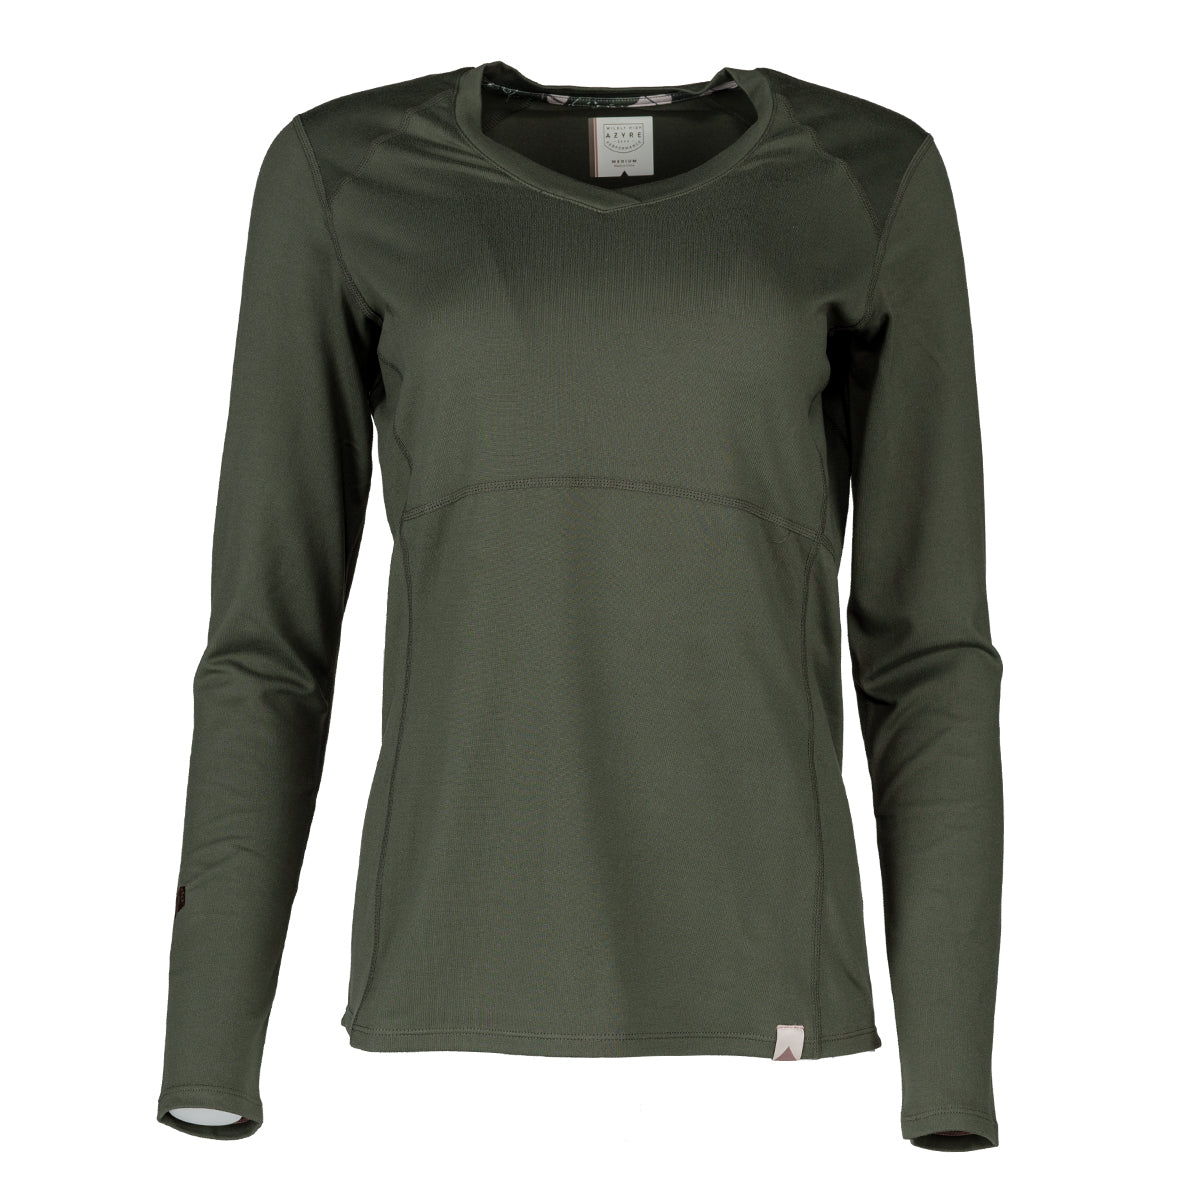 Azyre Vision Baselayer Top in  by GOHUNT | Azyre - GOHUNT Shop